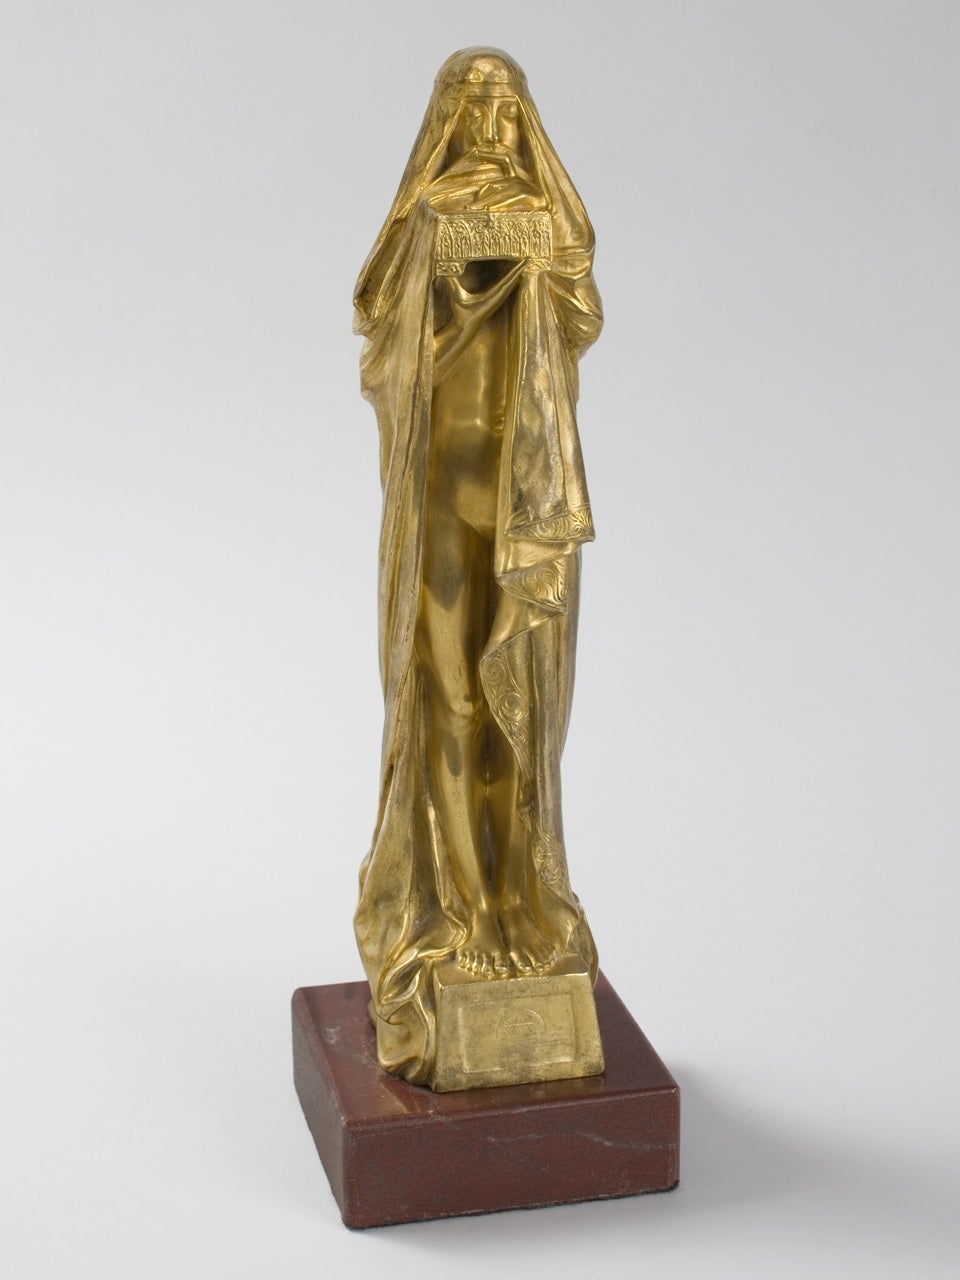 A French Art Nouveau gilt-bronze sculpture by Pierre Fix-Masseau, depicting a woman with a woman, eyes closed, finger over lips holding a mysterious box. Titled “Le Secret.” Circa 1900.

Pictured in:  Art Nouveau Sculpture  by Alastair Duncan,